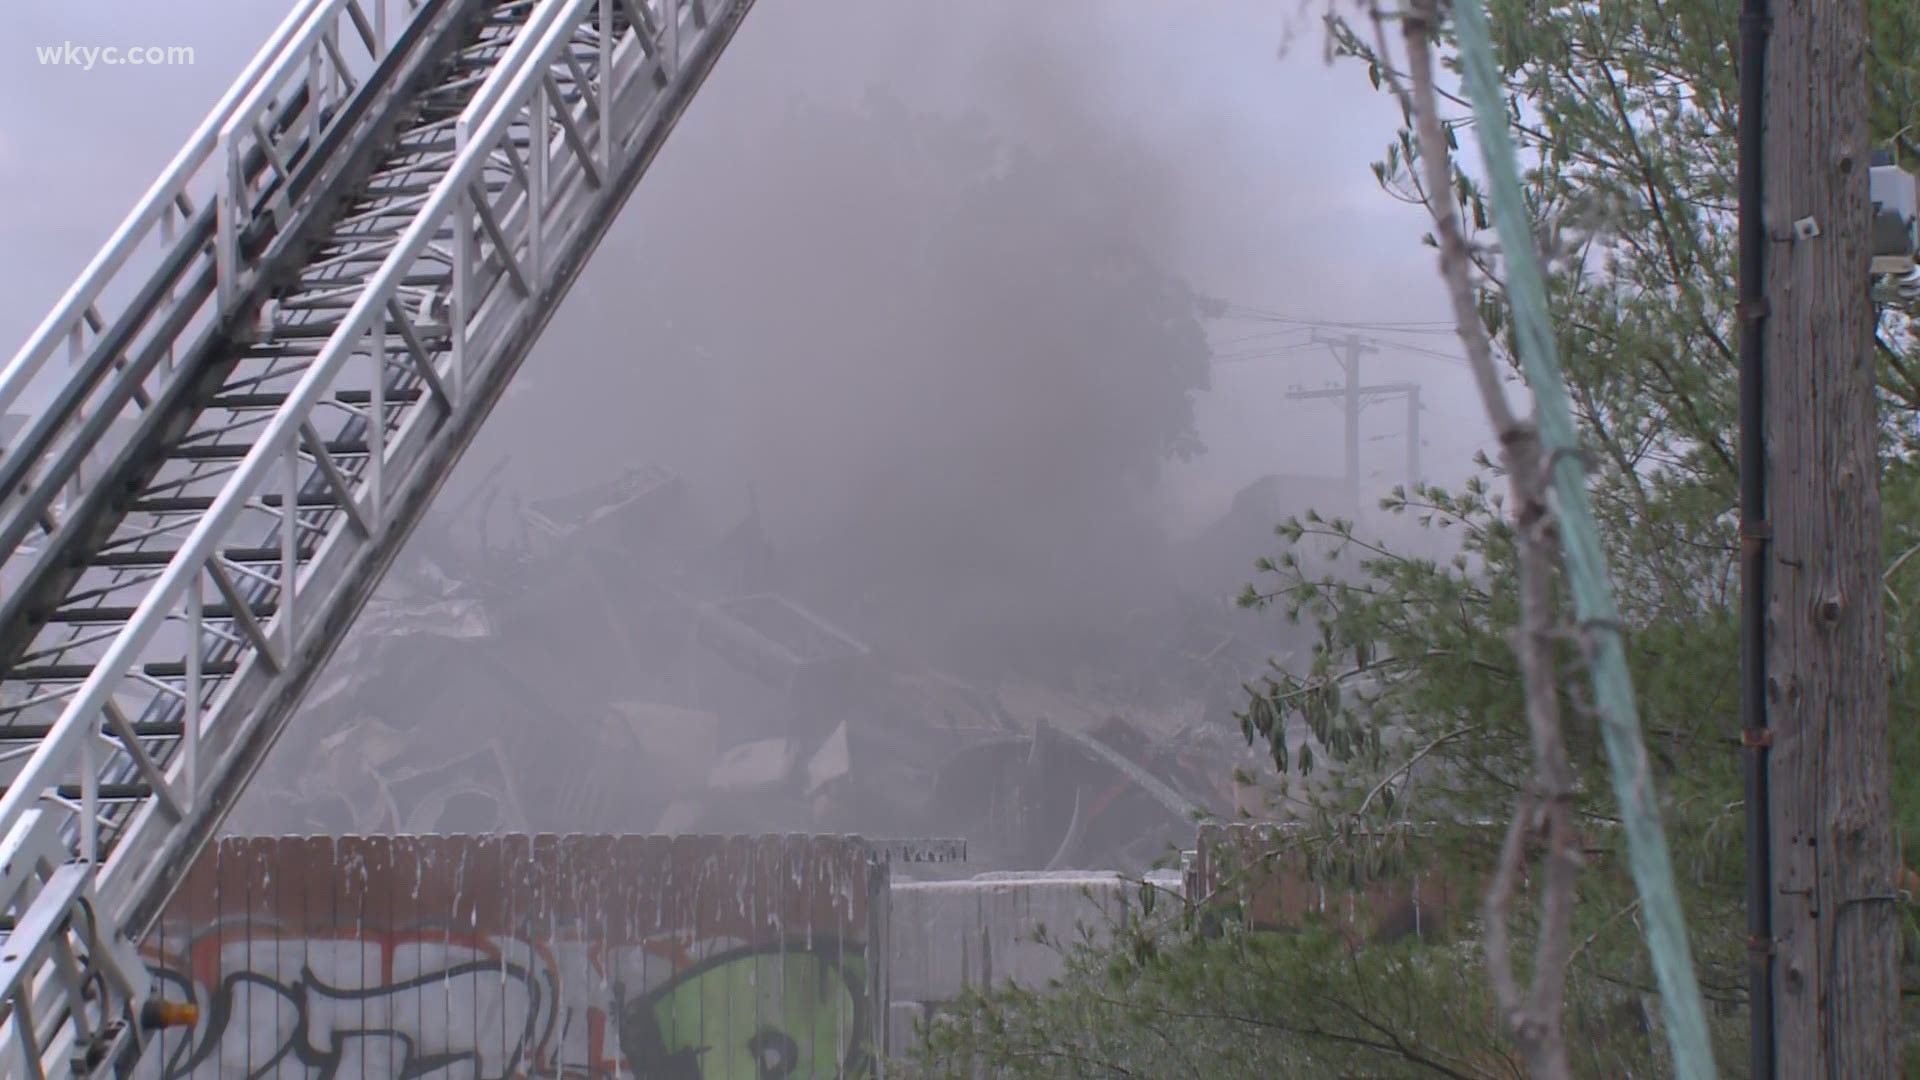 Cleveland Fire is on the scene near the 6400 block of Stock Avenue in Cleveland, working to extinguish the blaze.